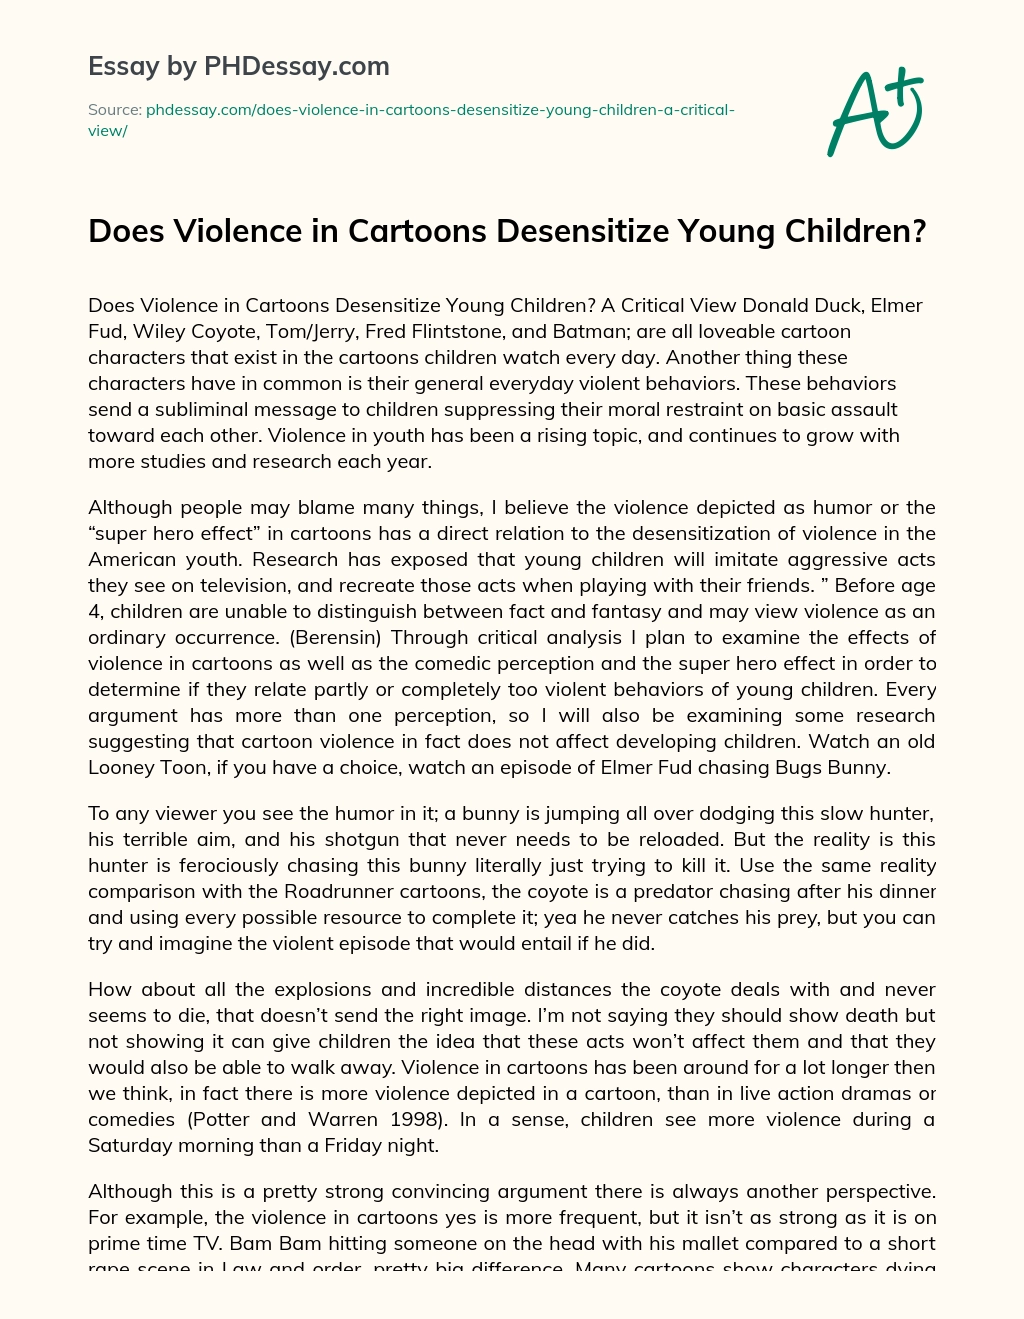 Does Violence In Cartoons Desensitize Young Children? Example 